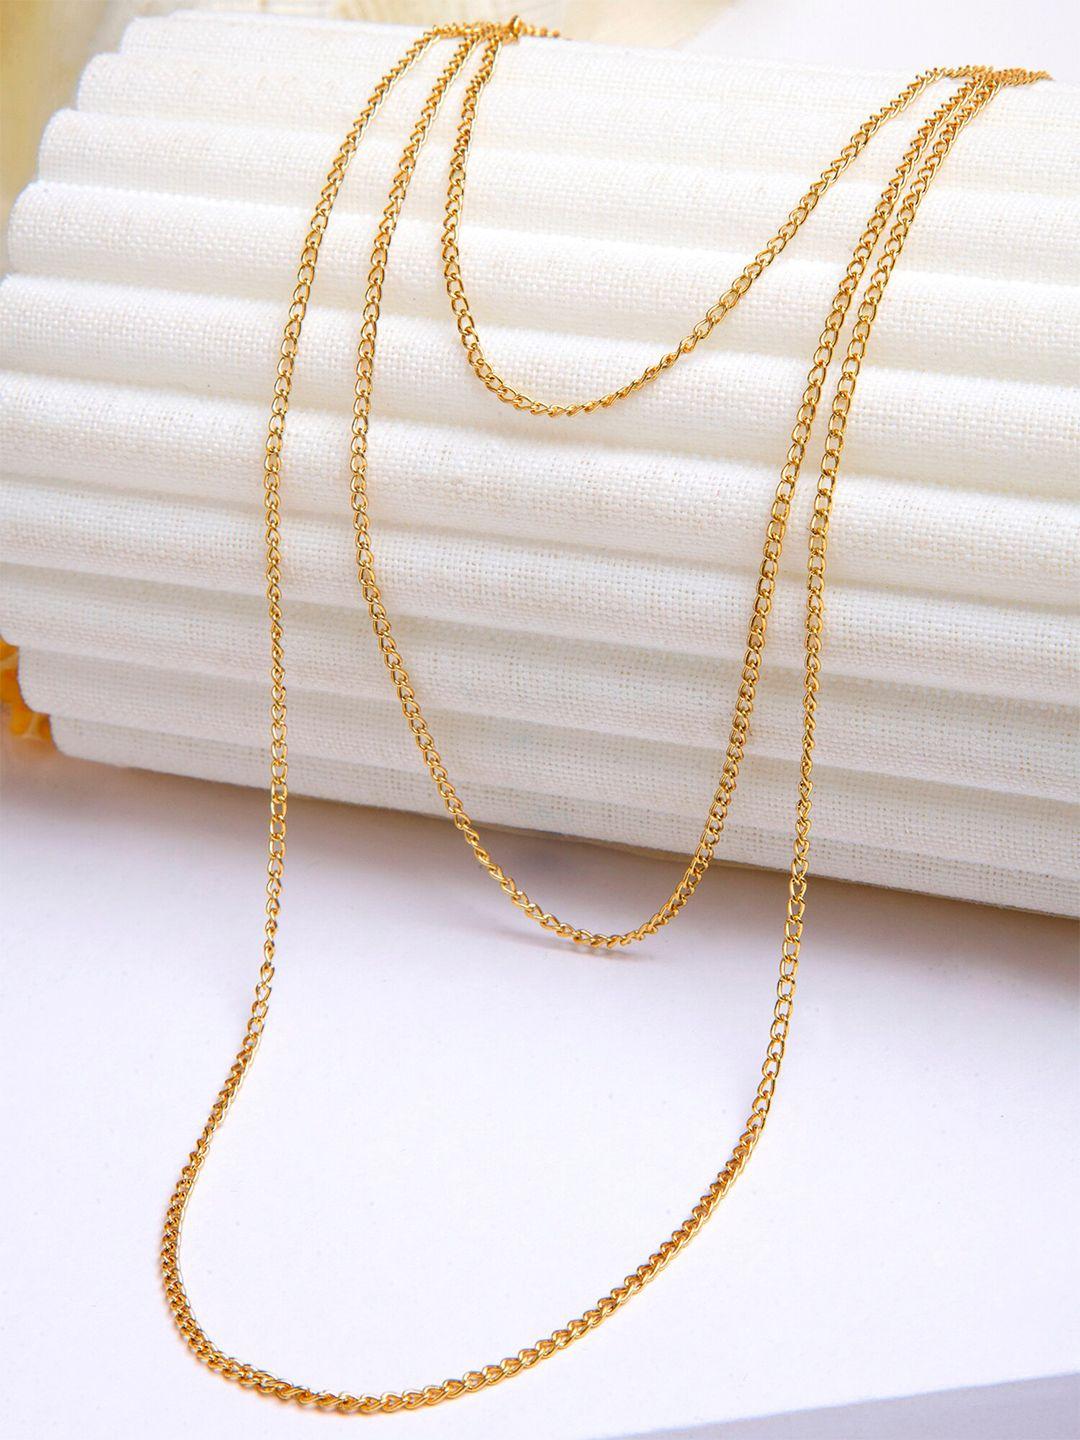 karatcart gold-toned gold-plated layered chain